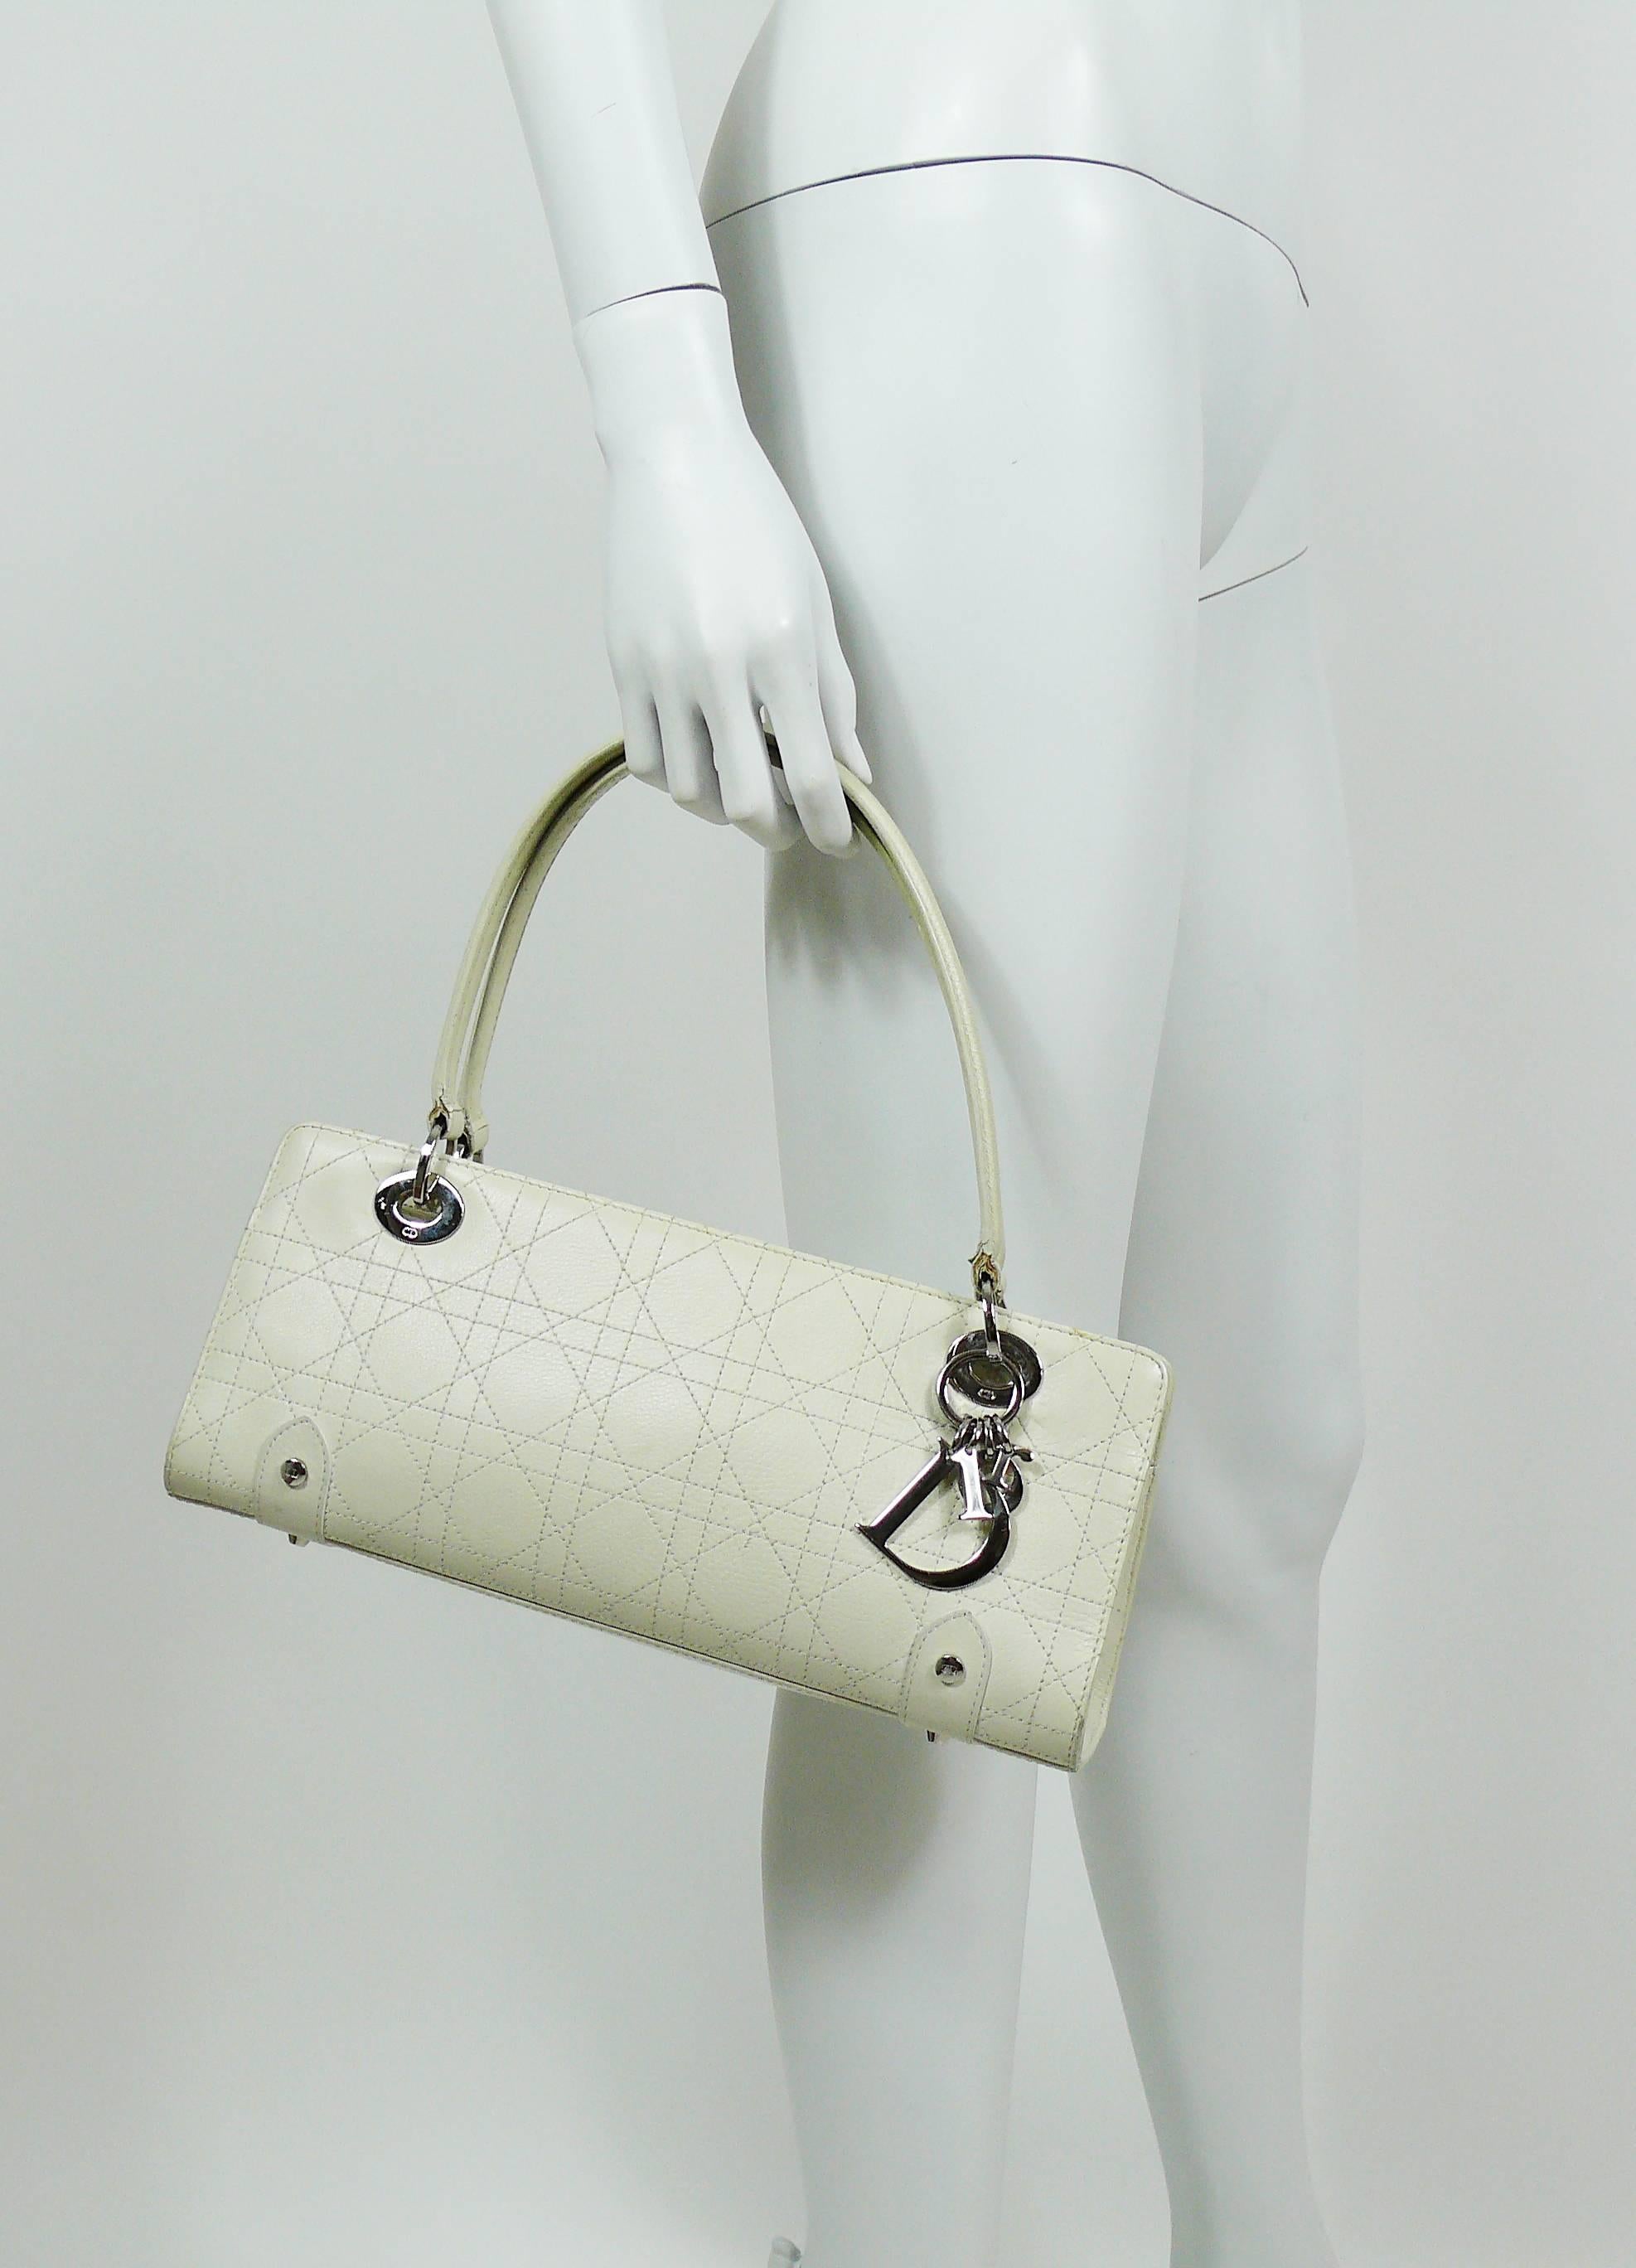 CHRISTIAN DIOR off white cannage East West Lady Dior handbag.

This bat features :
- Rectangular off-white leather body featuring the iconic signature geometric cannage quilting in white.
- Leather handles with silver toned links embossed with